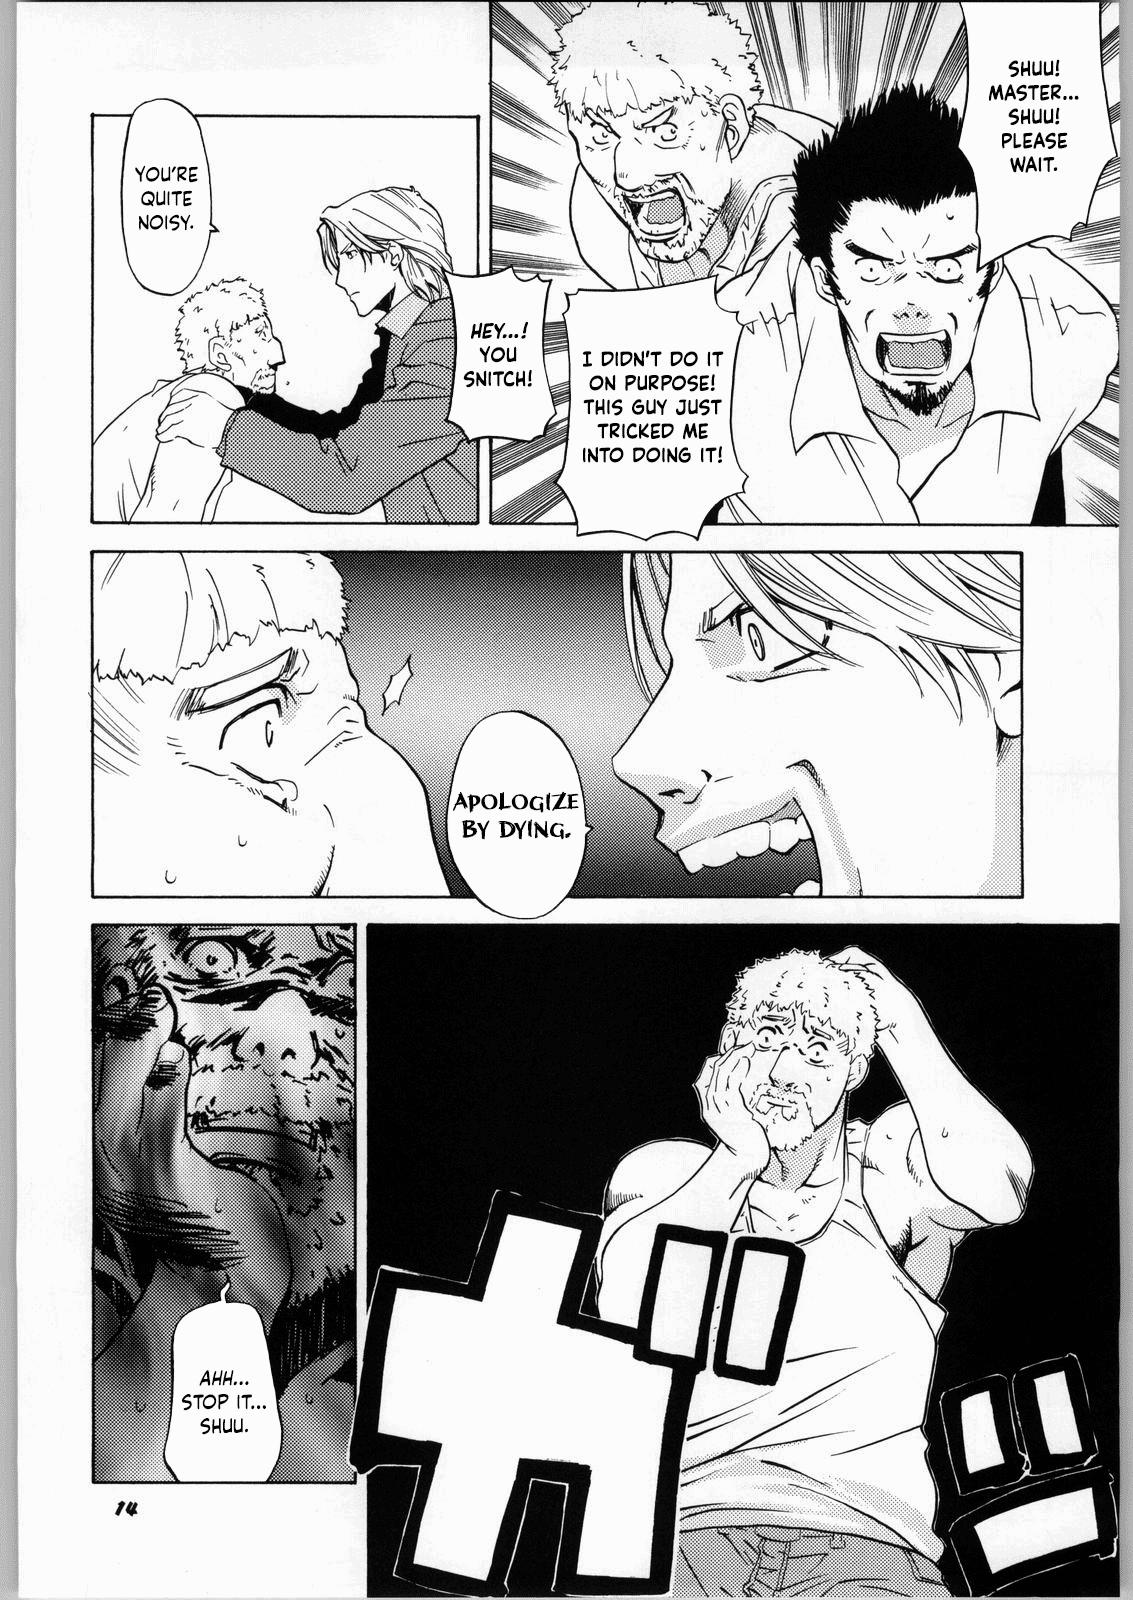 Foot Fetish Tenimuhou No.6 - Another Story of Notedwork Street Fighter - Street fighter Gaysex - Page 13